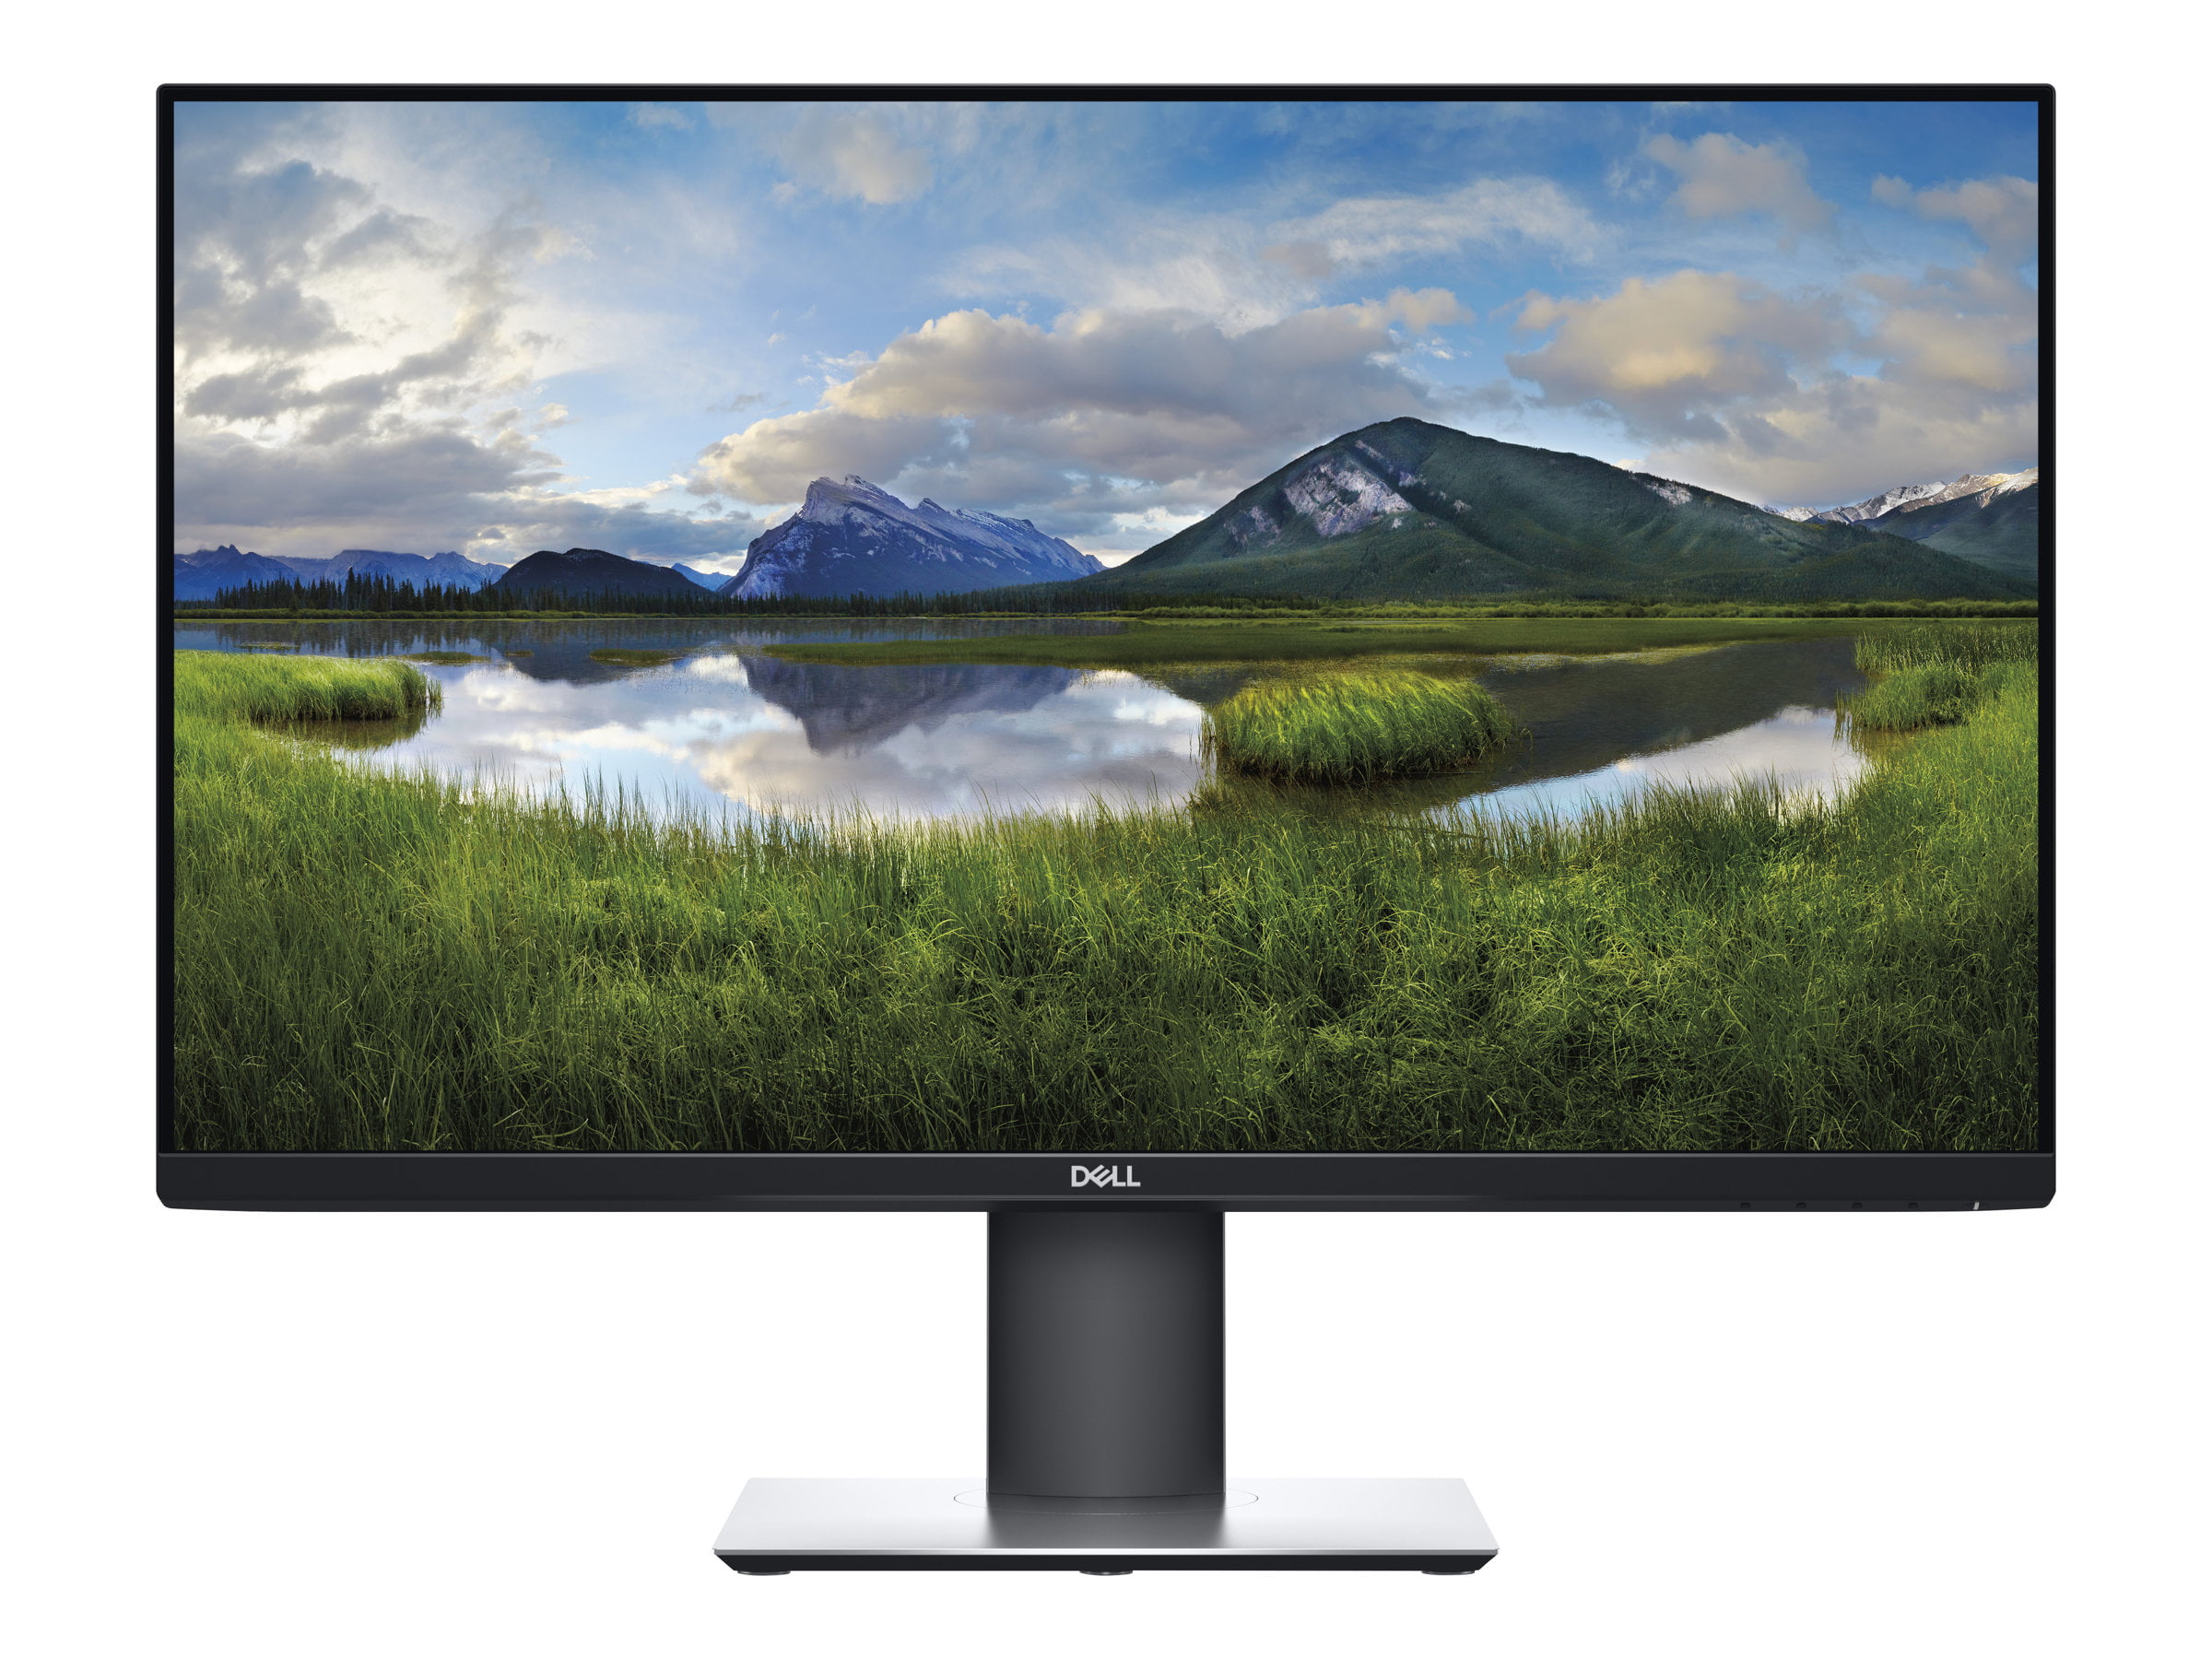 Dell P2719HC - LED monitor - 27" (27" viewable) - 1920 x 1080 Full HD (1080p) @ 60 Hz - IPS - 300 cd/m������ - 1000:1 - 5 ms - HDMI, DisplayPort, USB-C - with 3 years Advanced Exchange Service